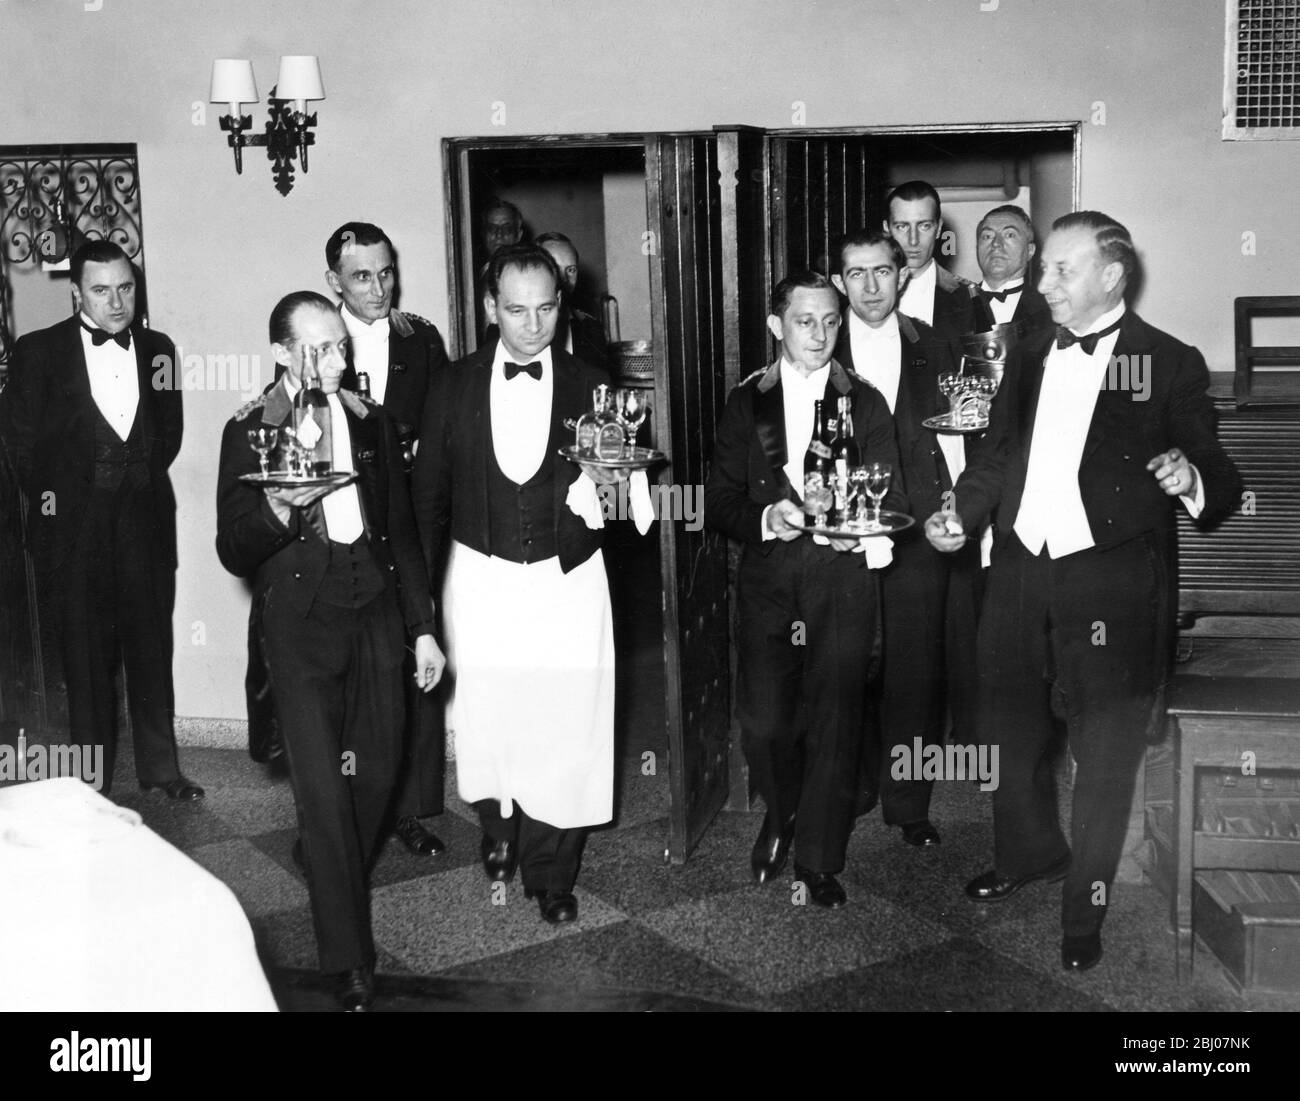 Ready to serve their patrons . - The holders of the liquor permit No.1 , which is held by the Hotel Astor , New York , did not waste any time in preparing their waiters to start serving their patrons the moment the prohibition repeal became effective on 5 December . The photo shows the headwaiter motioning his waiters to start serving the thirsty patrons on exactly 5.31 , Eastern time when Utah voted the repeal of the 18 th Amendment . - 12 May 1933 Stock Photo